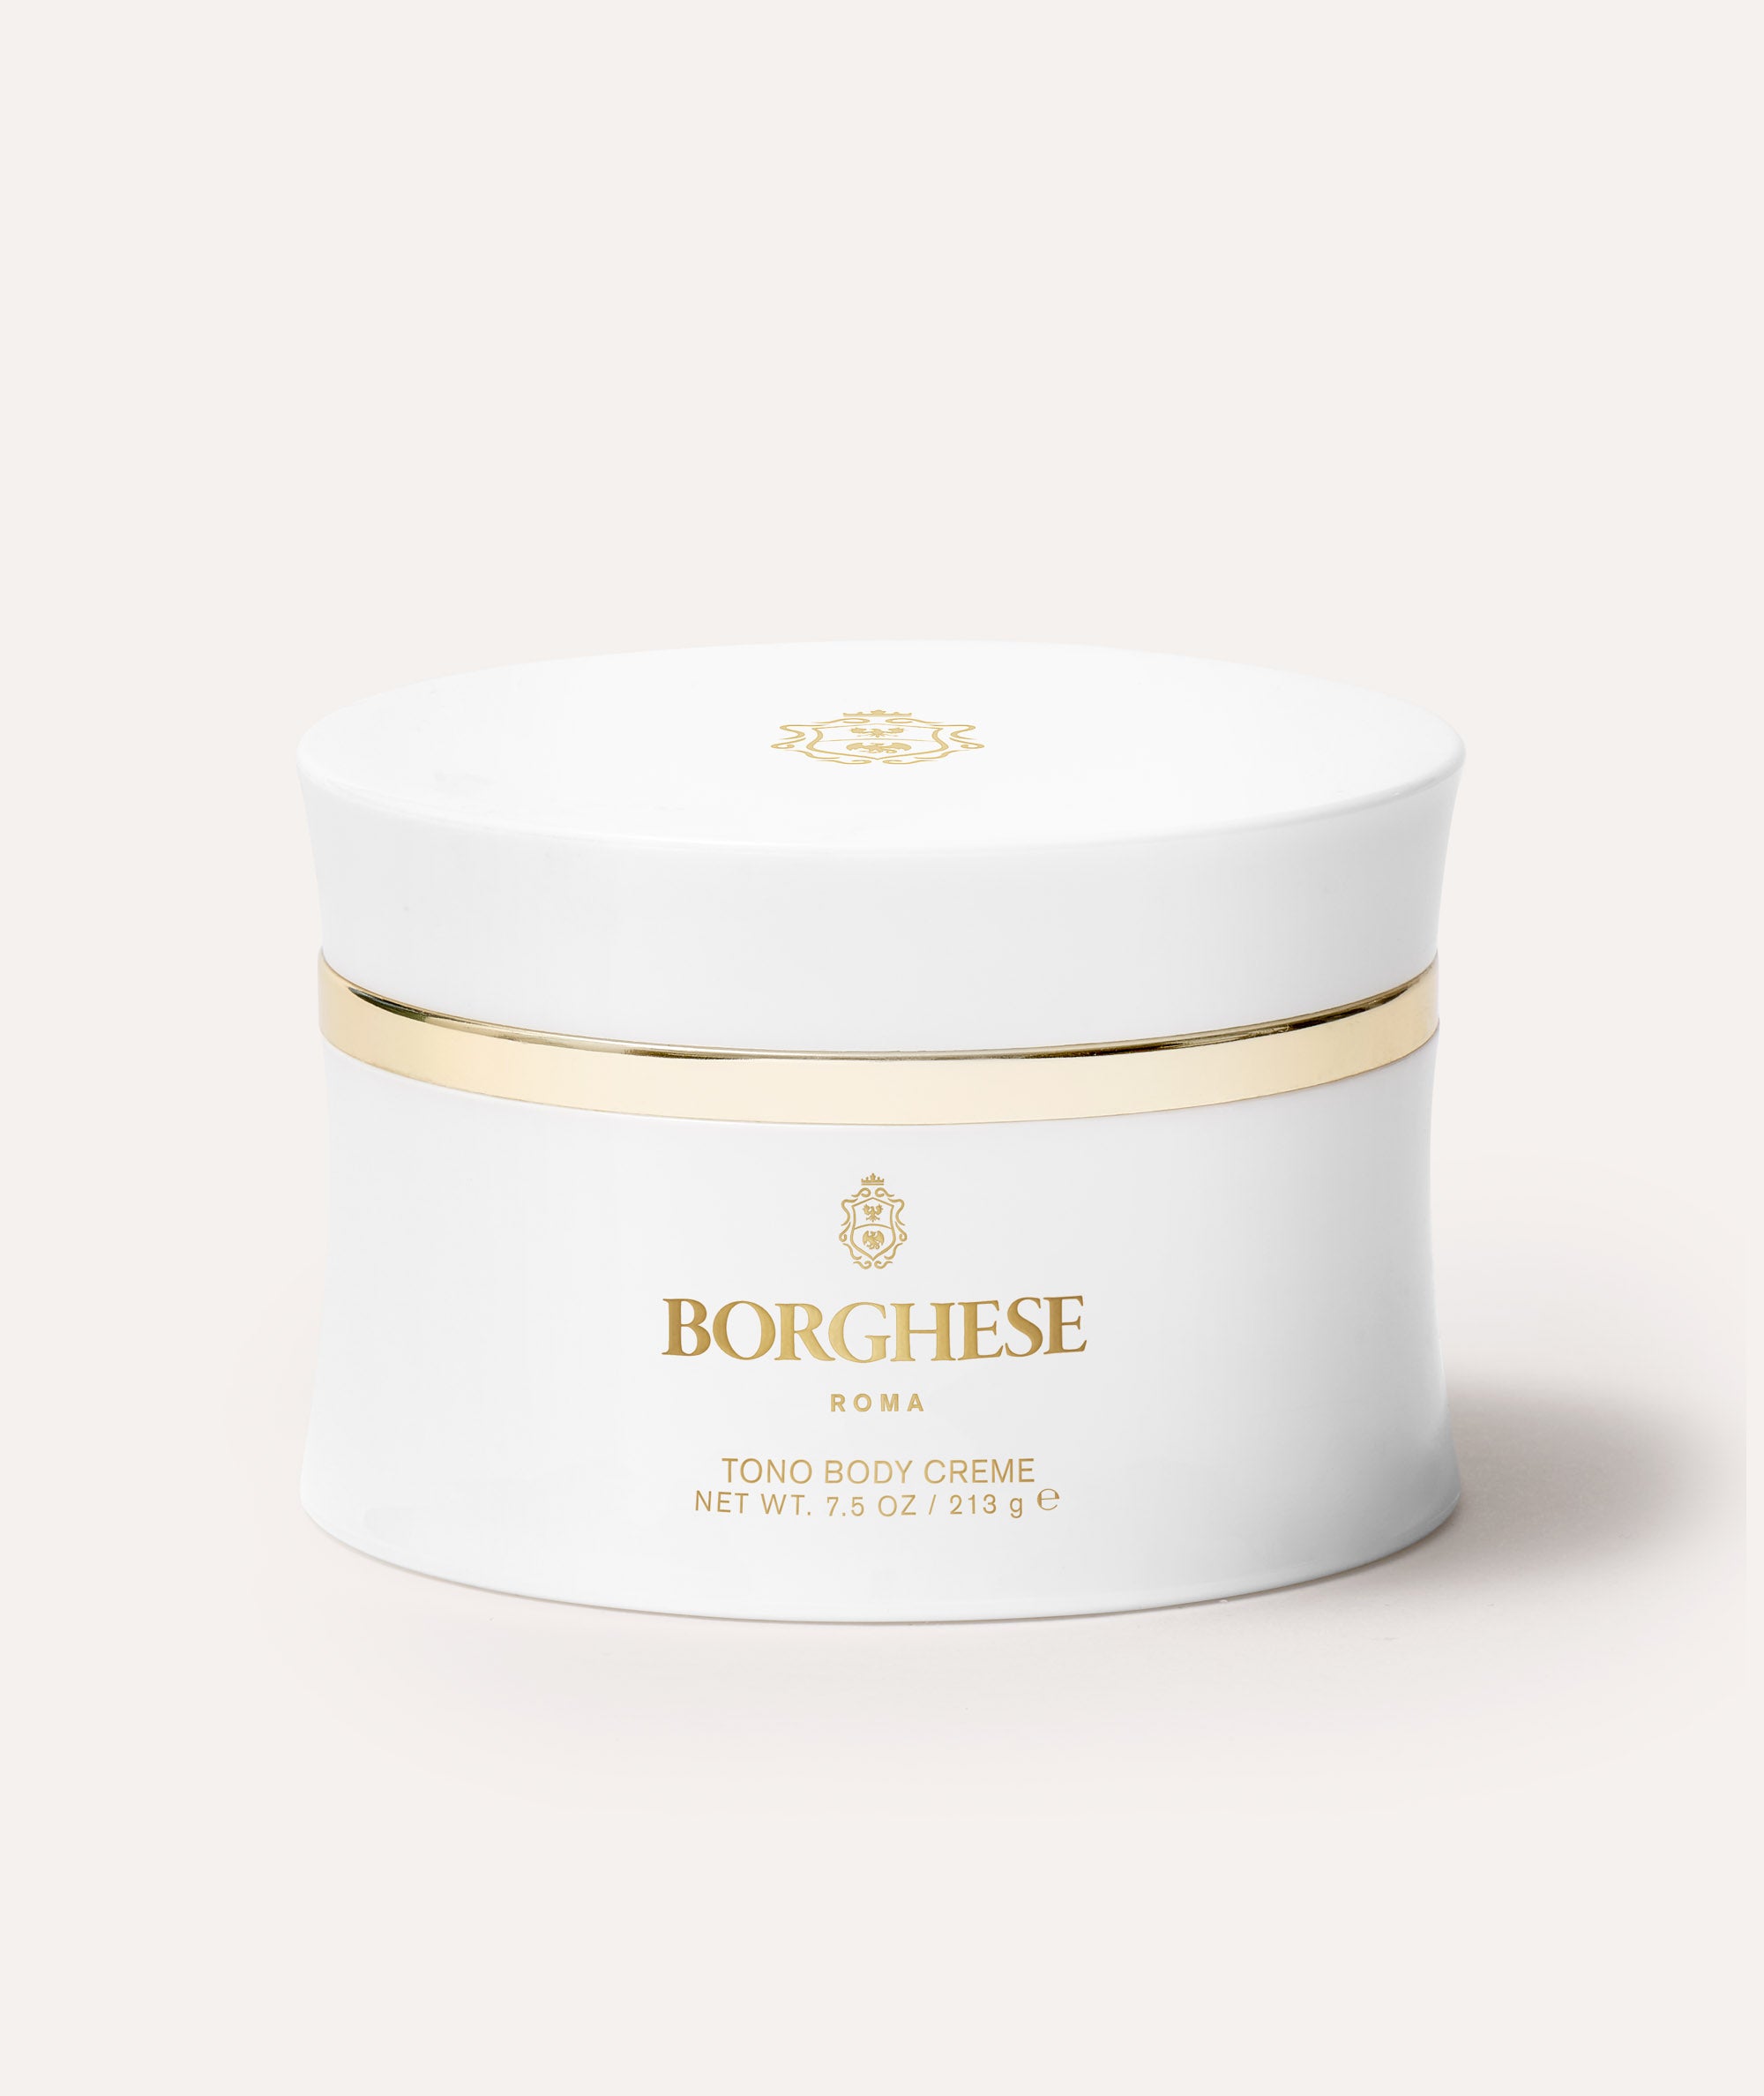 This is a picture of the Borghese Tono Body Creme in a white jar